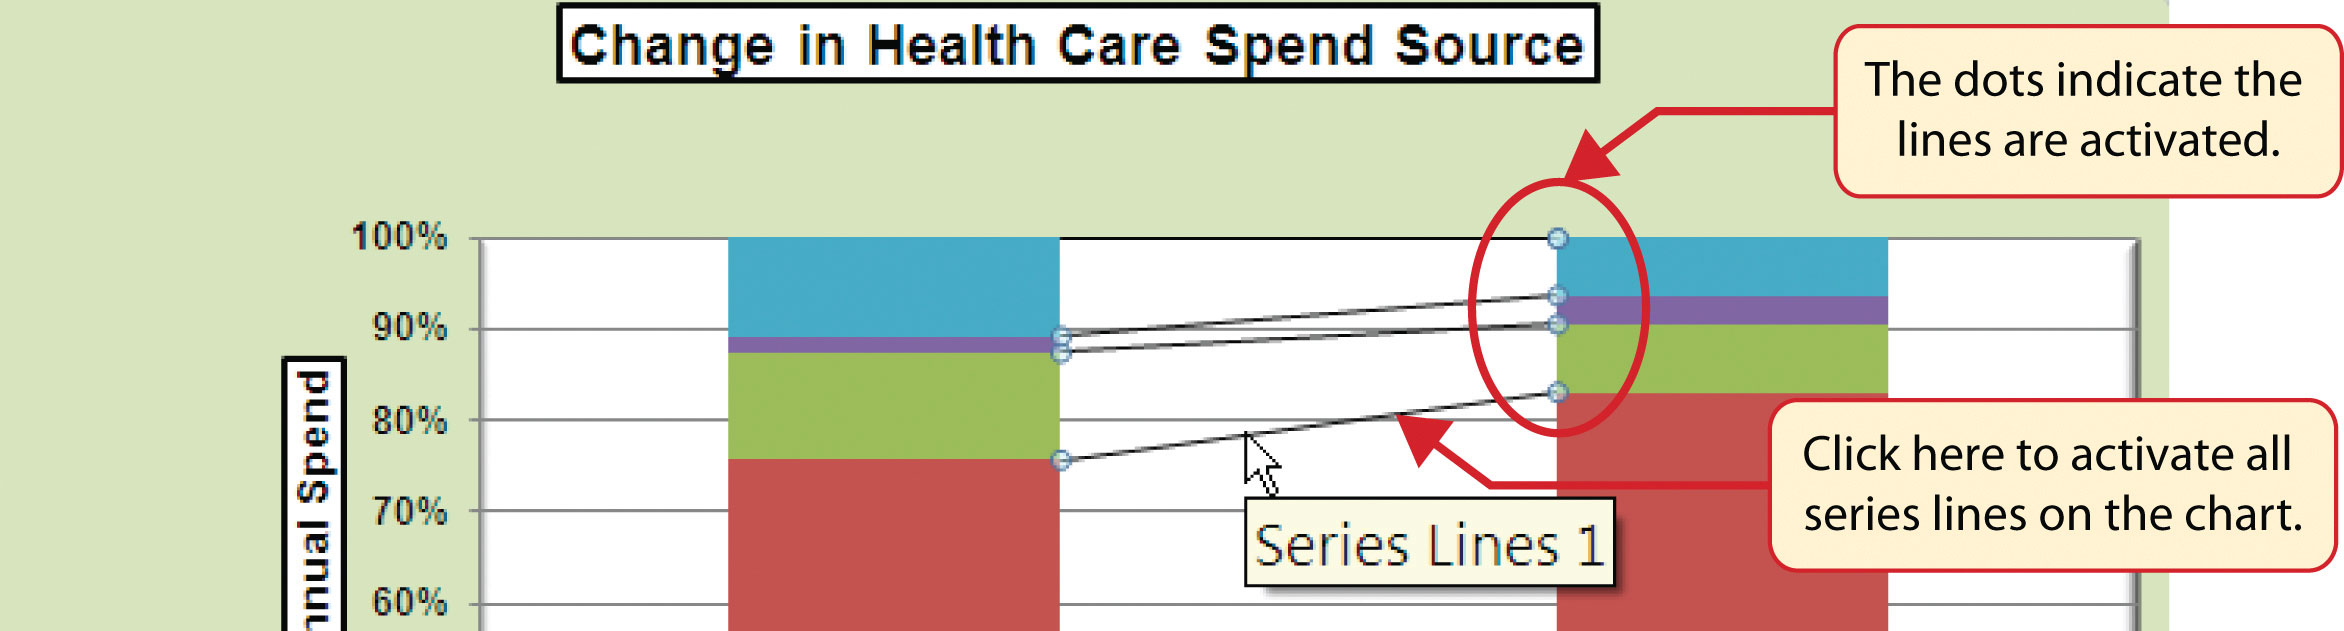 Add Series Lines To Stacked Bar Chart